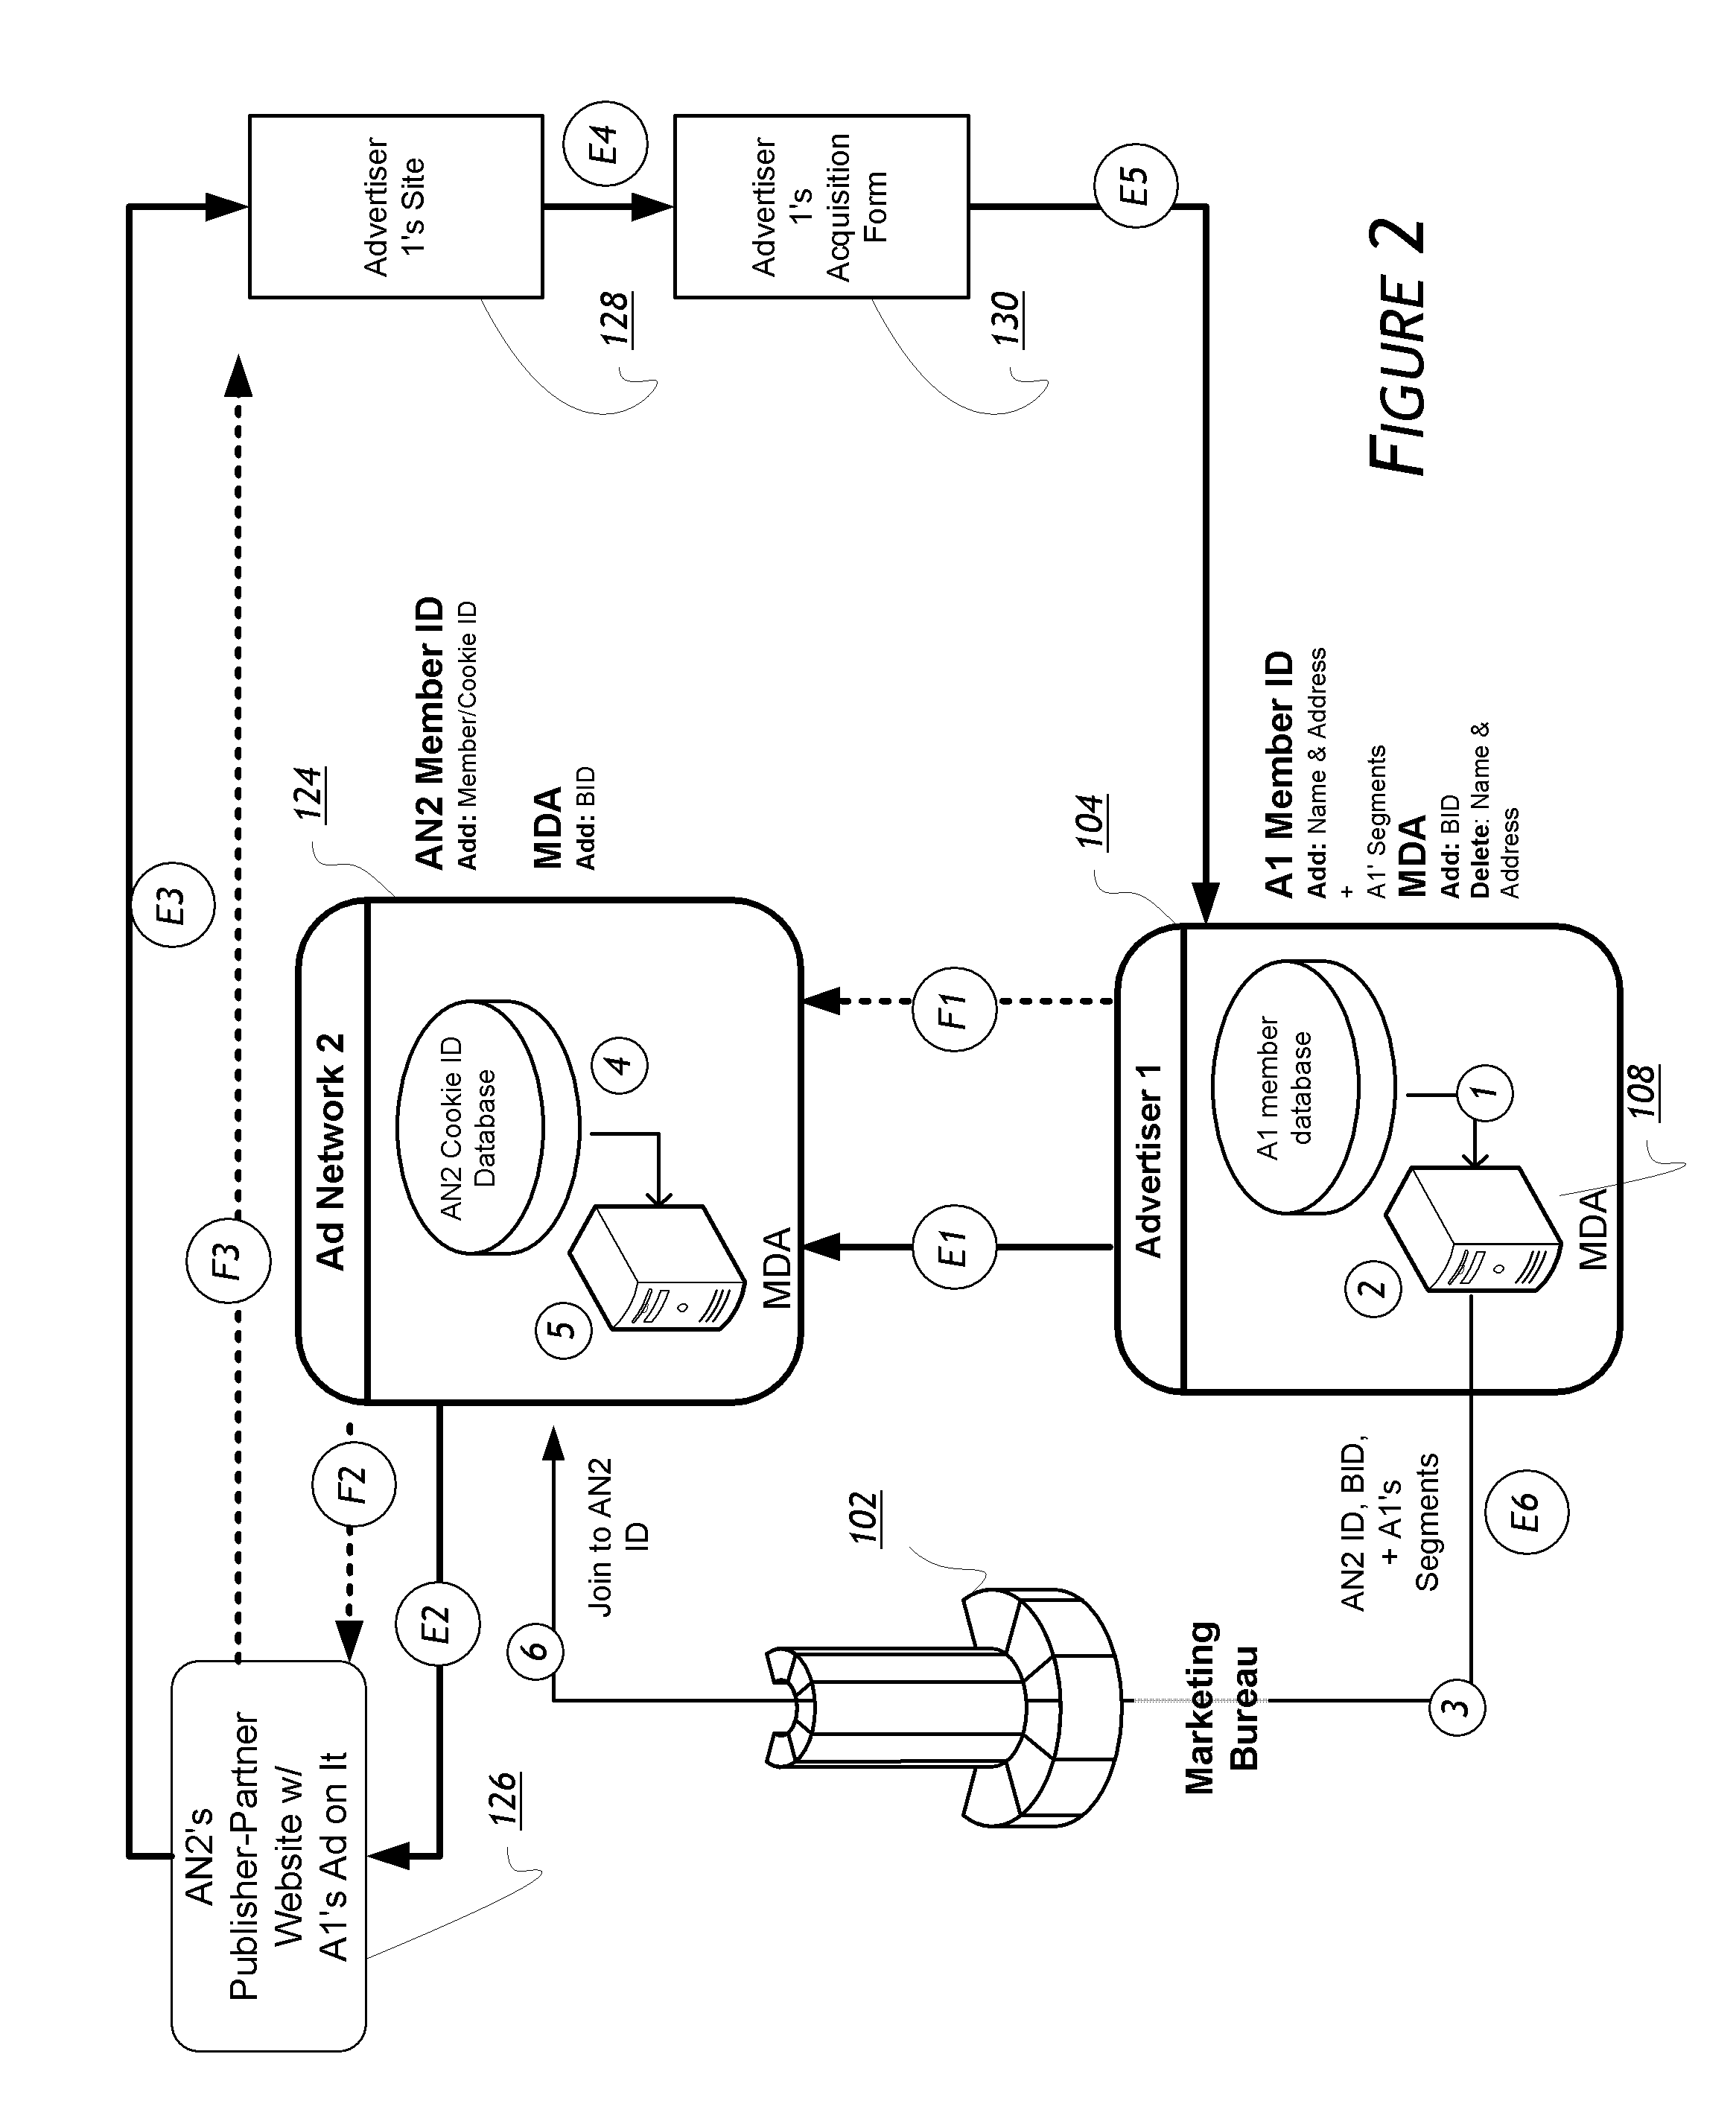 Systems and methods for providing anonymized user profile data